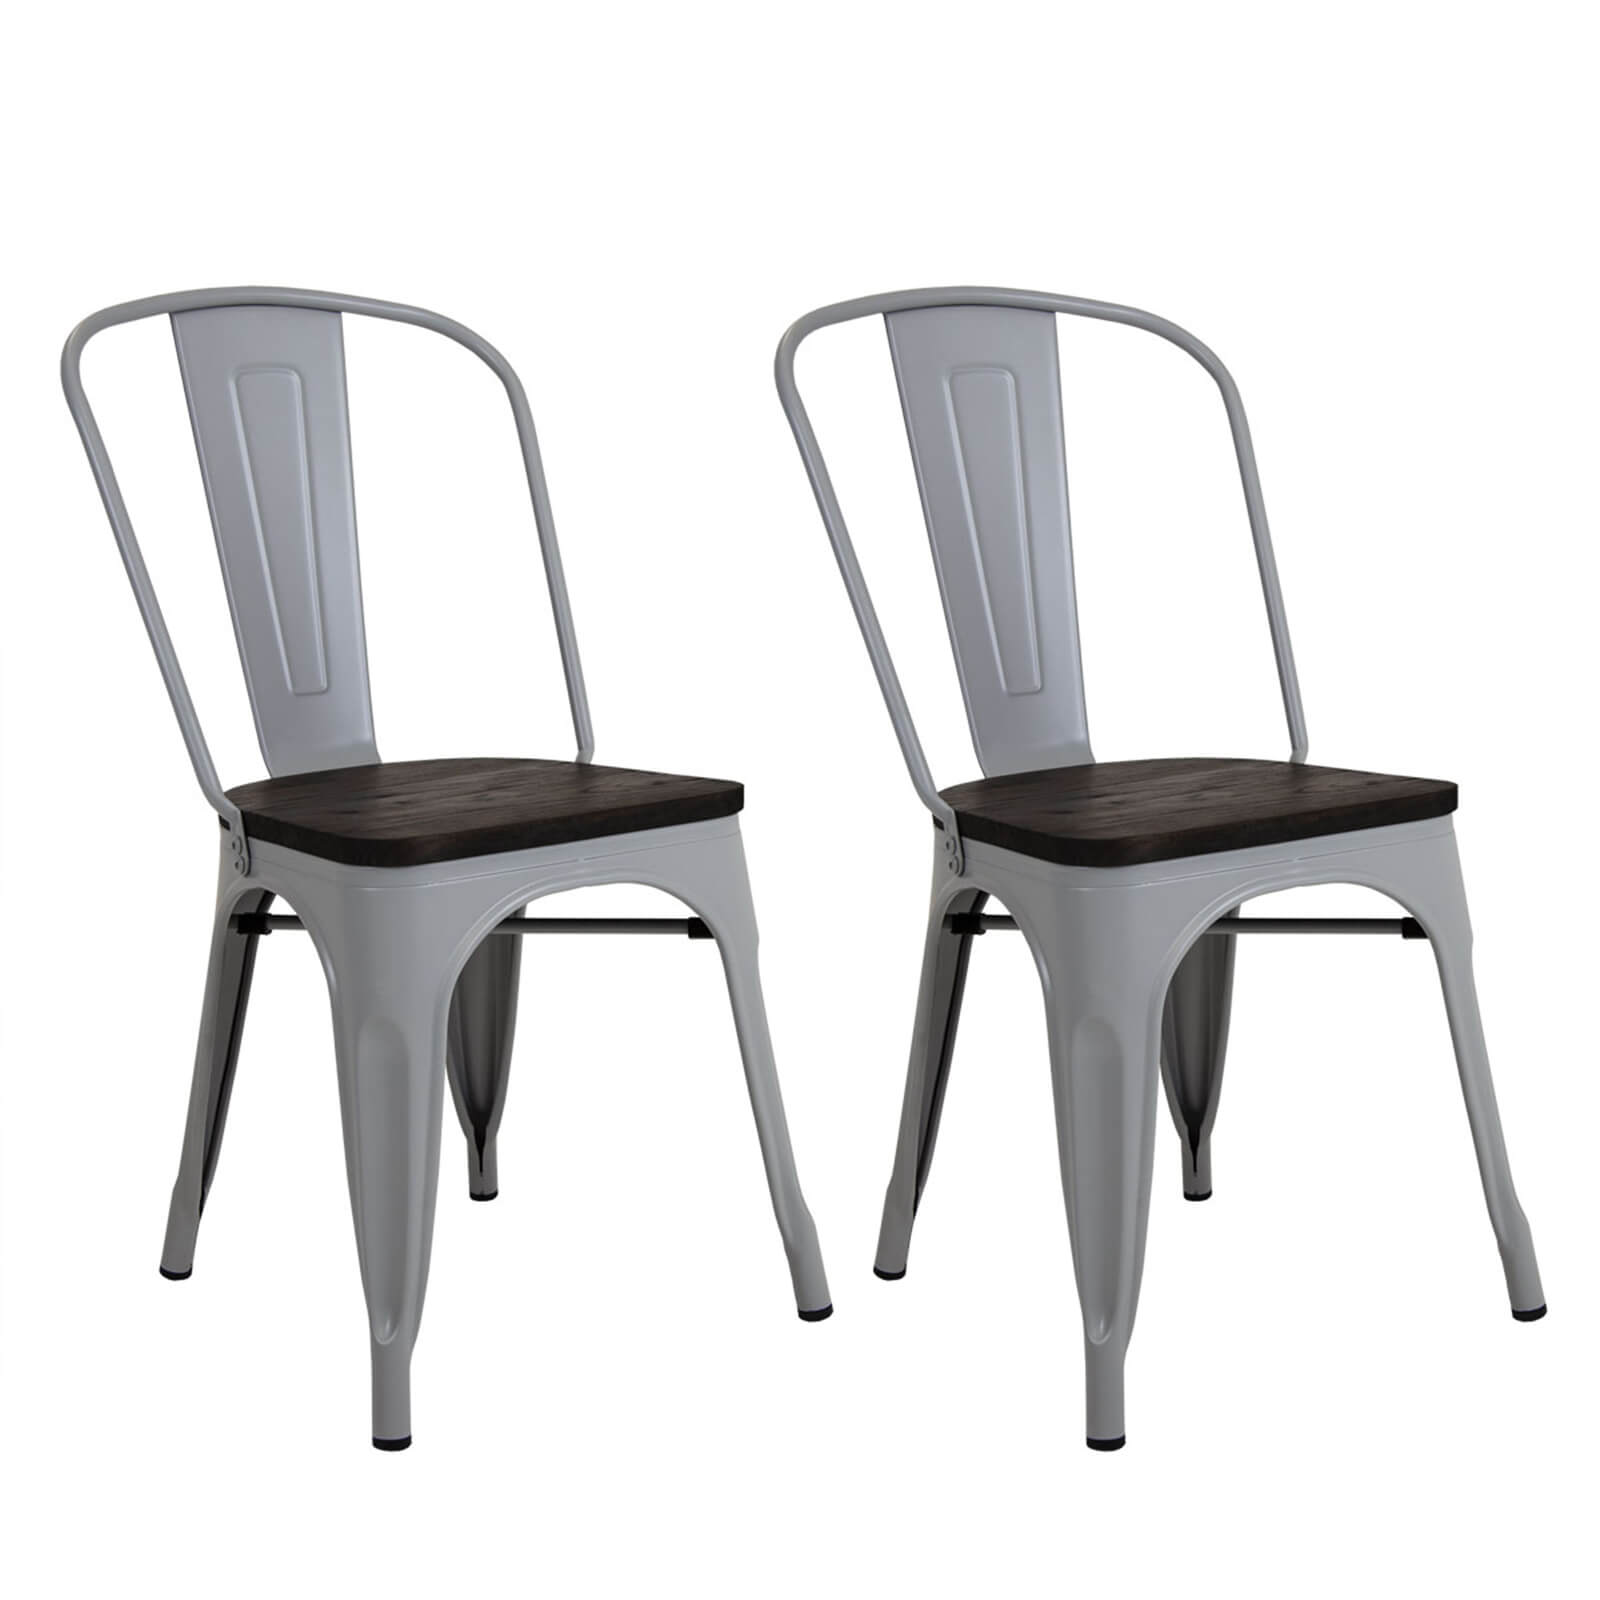 Pair of Metal & Wood Dining Chairs - Light Grey